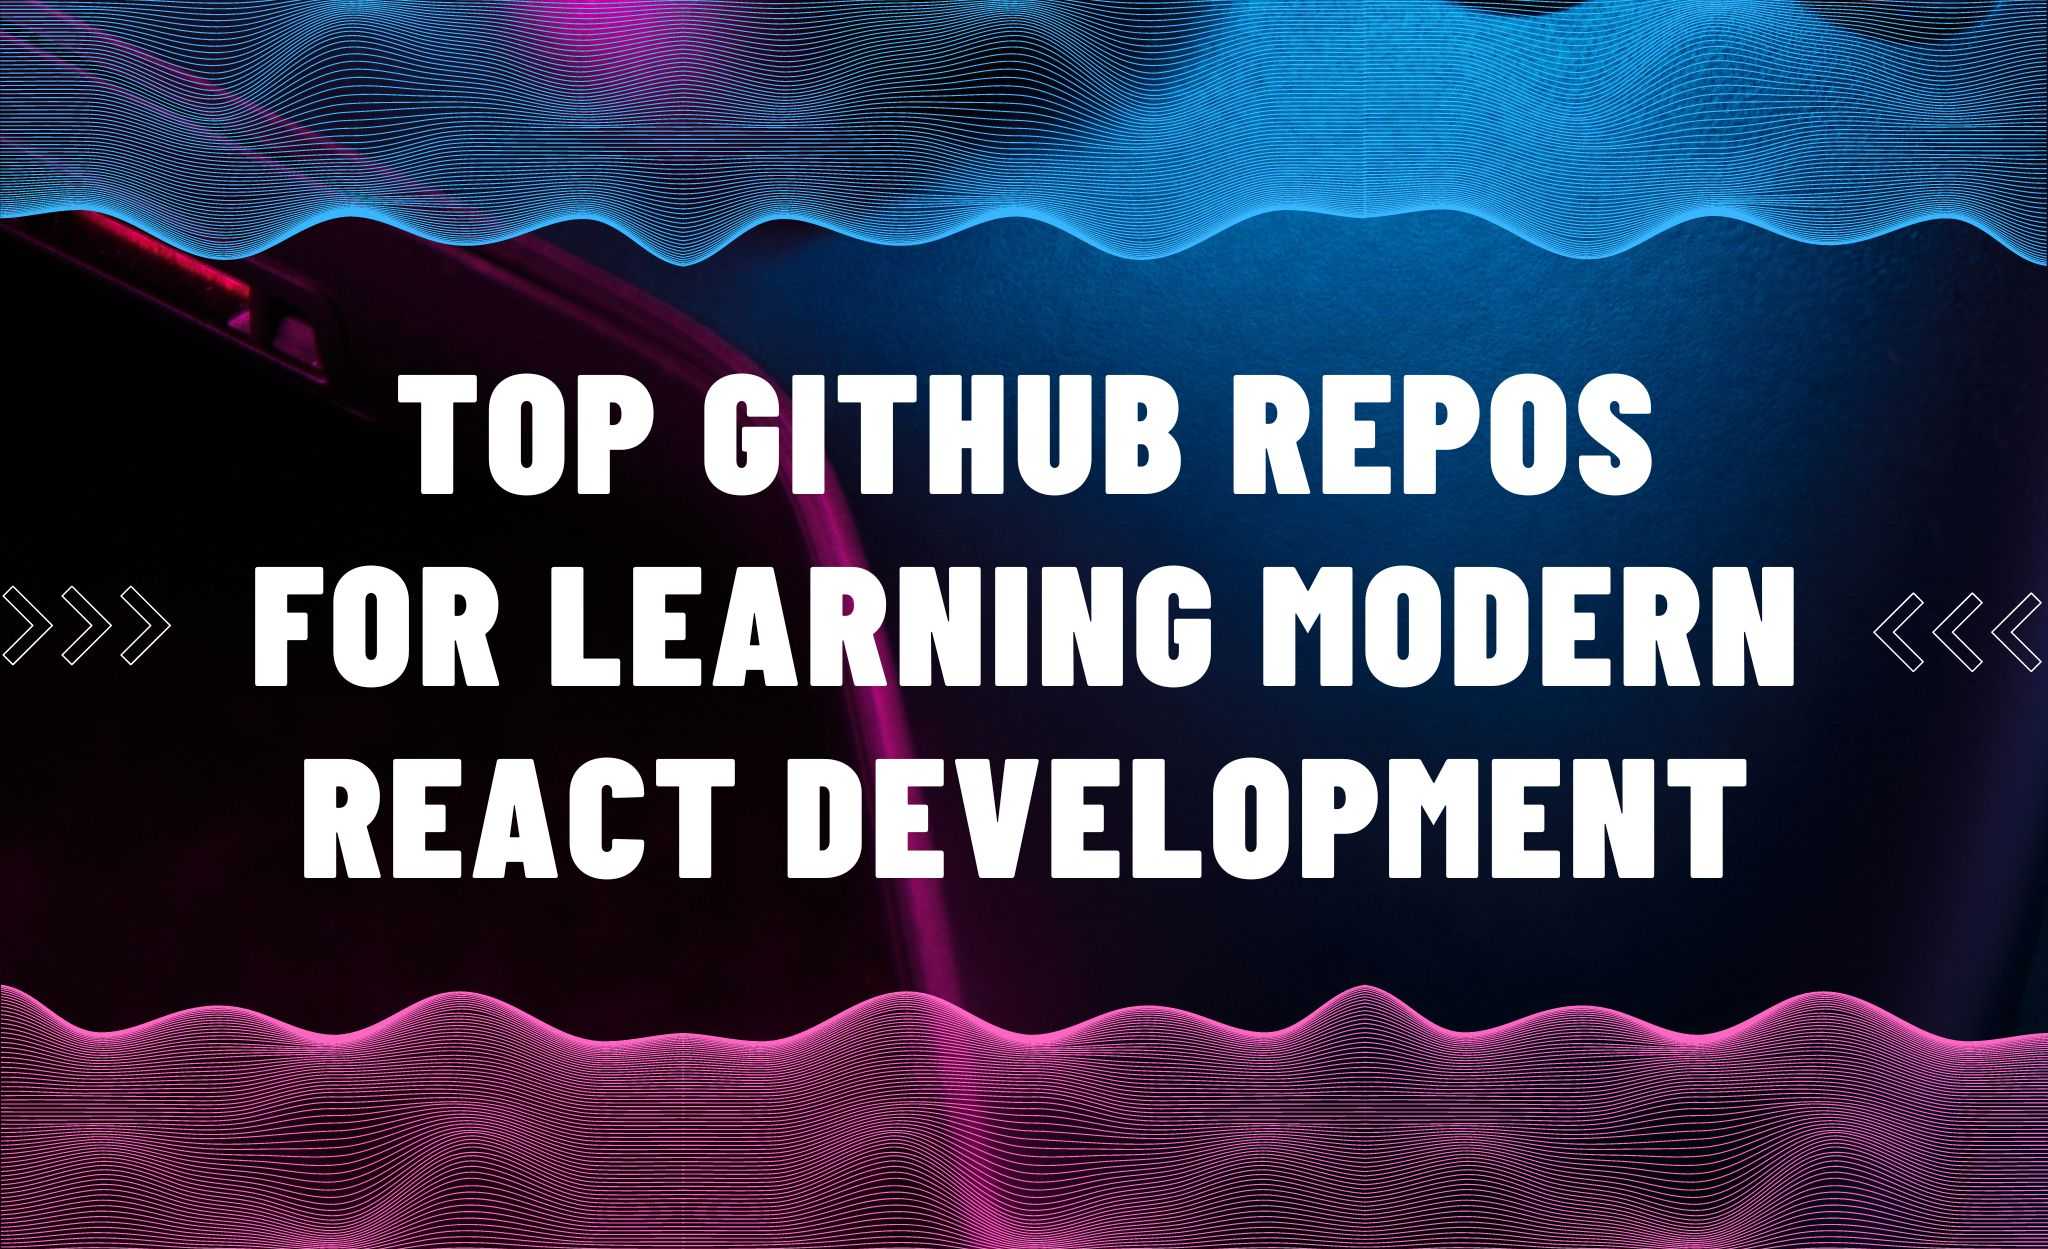 Top GitHub repositories to learn modern React development